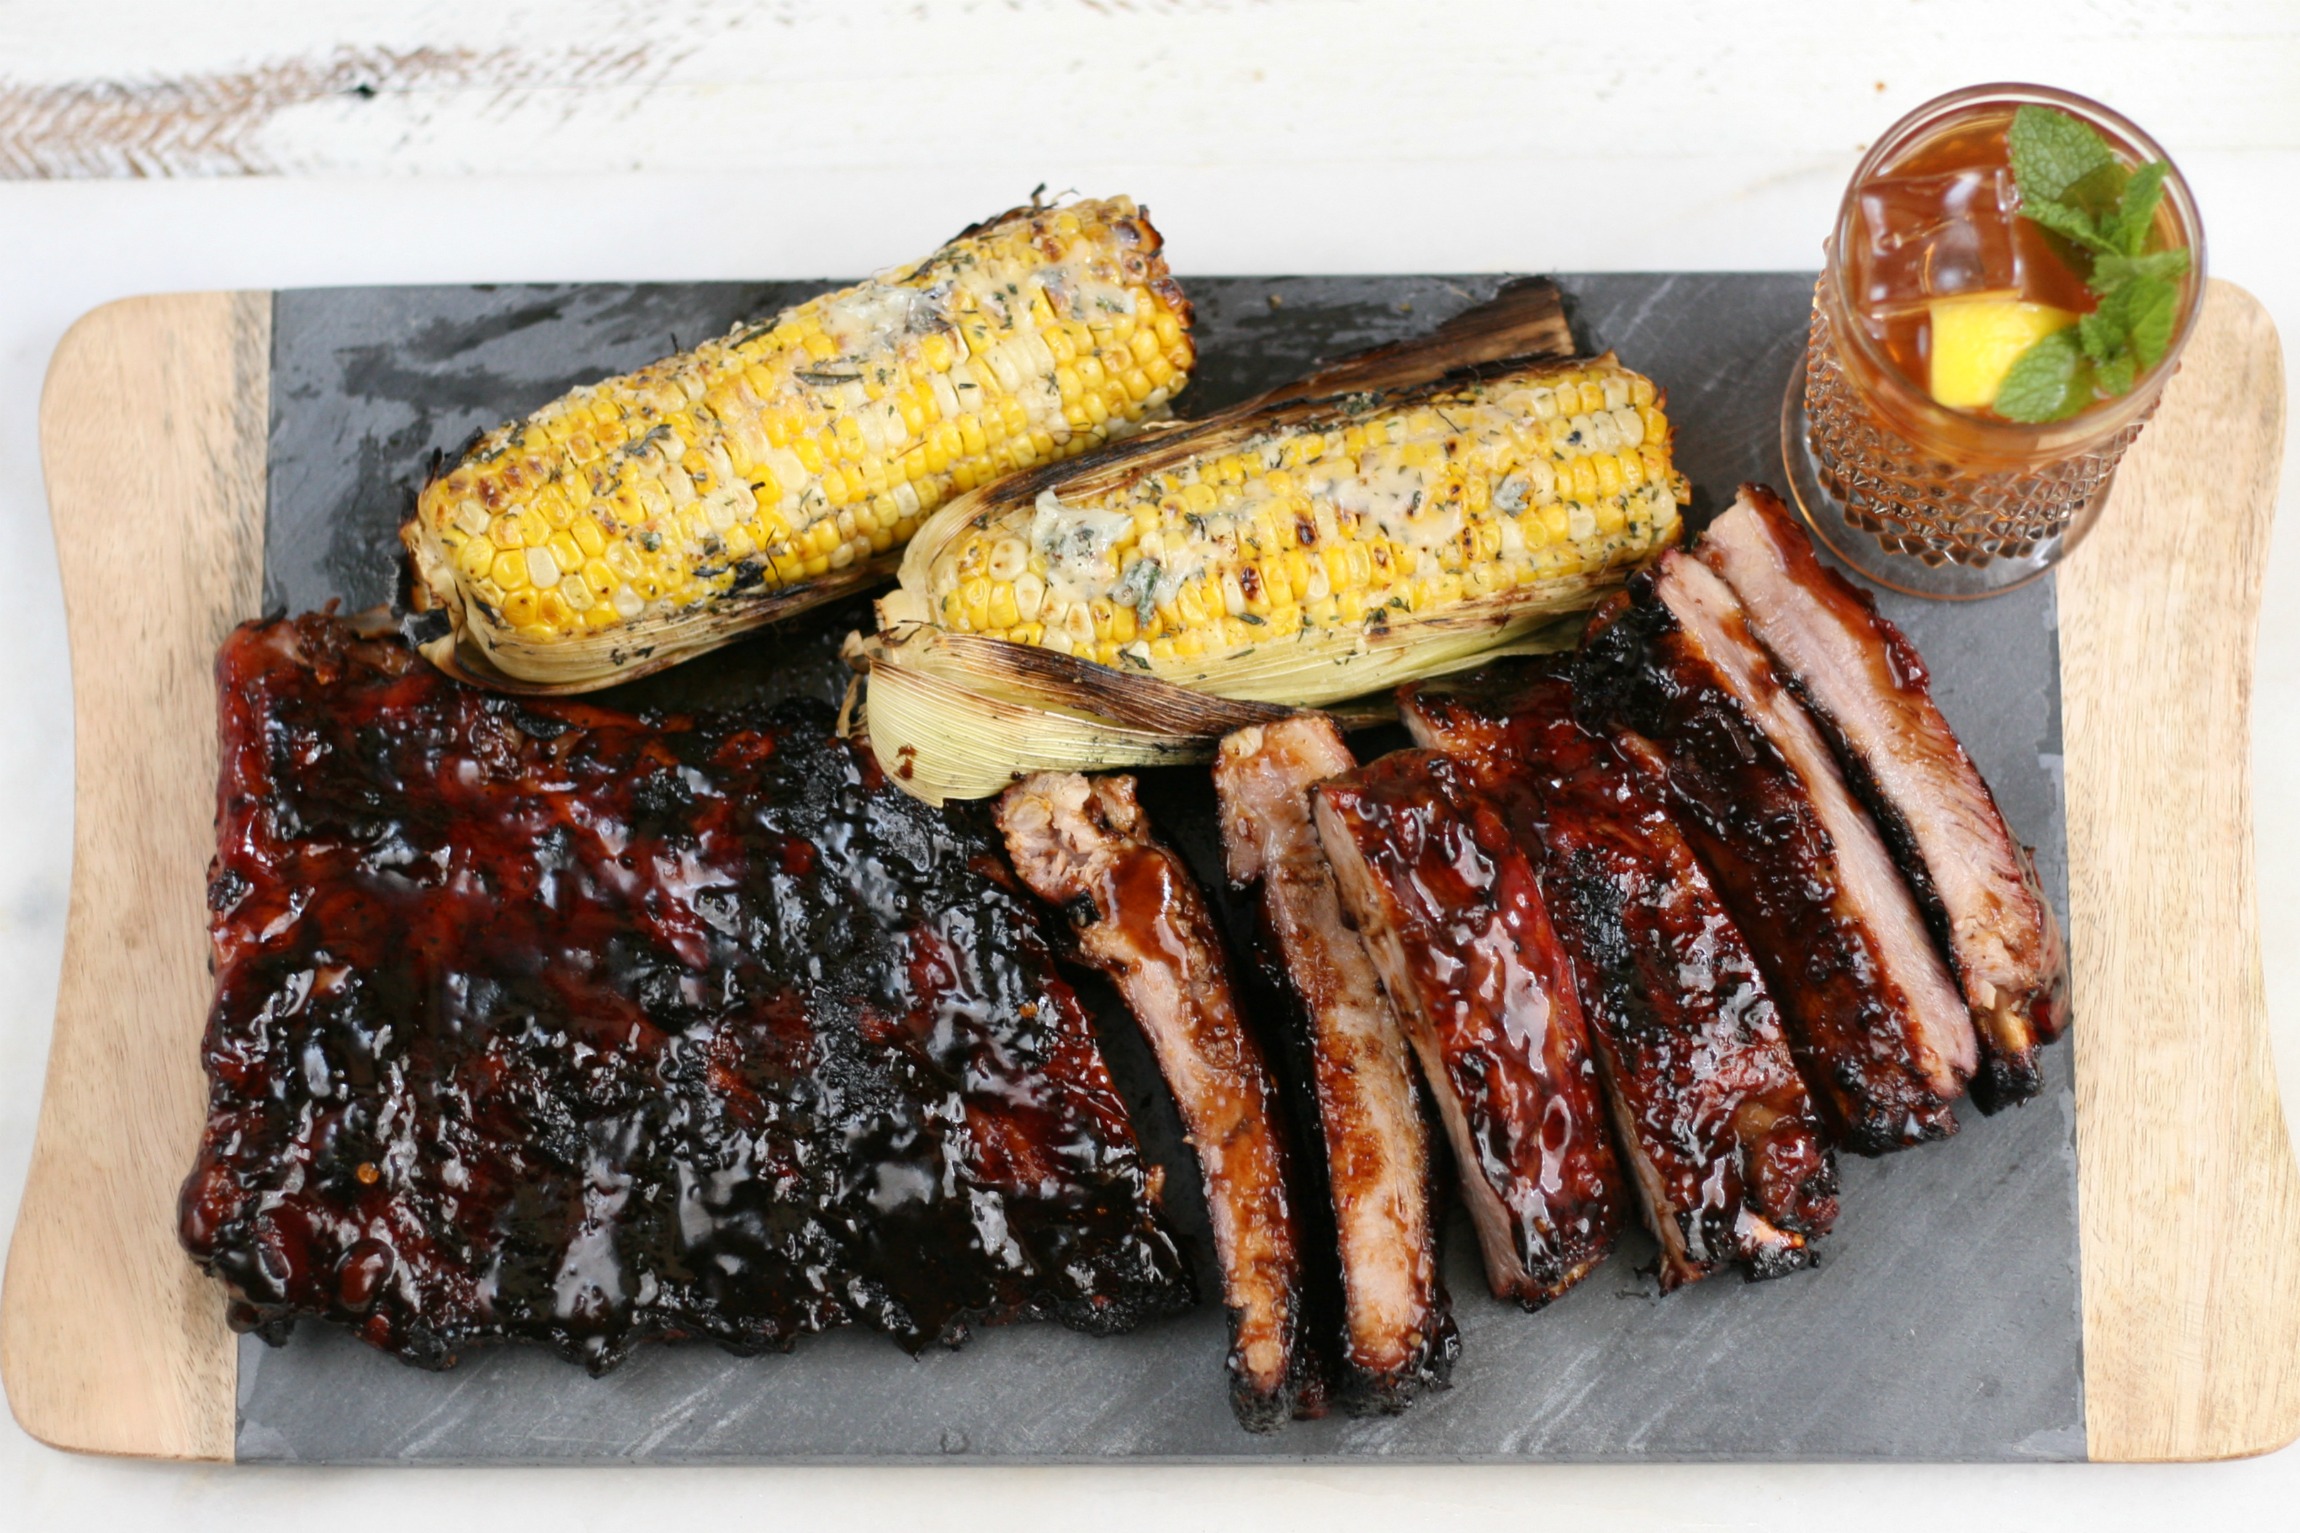 BBQ ribs on slate and wood tray, grilled corn on the cob, vintage glass cup of tea.